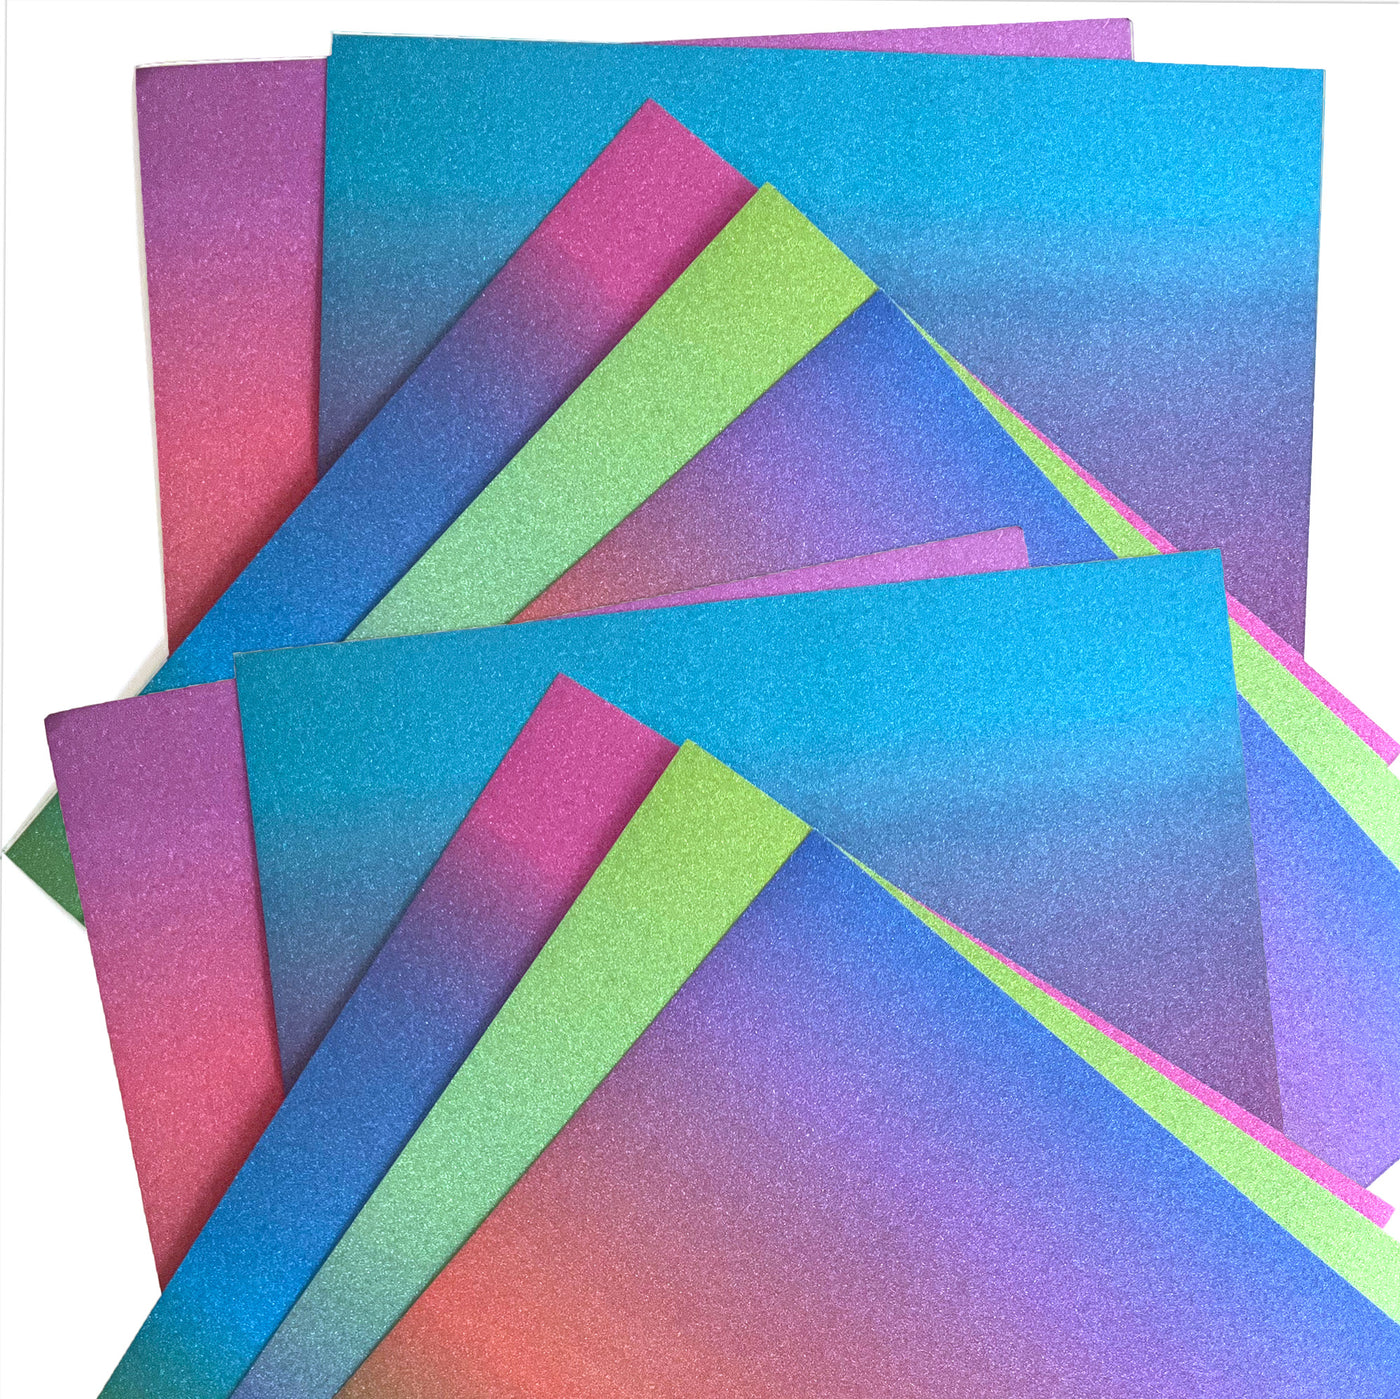 MULTI-COLORED GLITTER VARIETY PACK - 10 Sheets - 12x12 Cardstock Shop